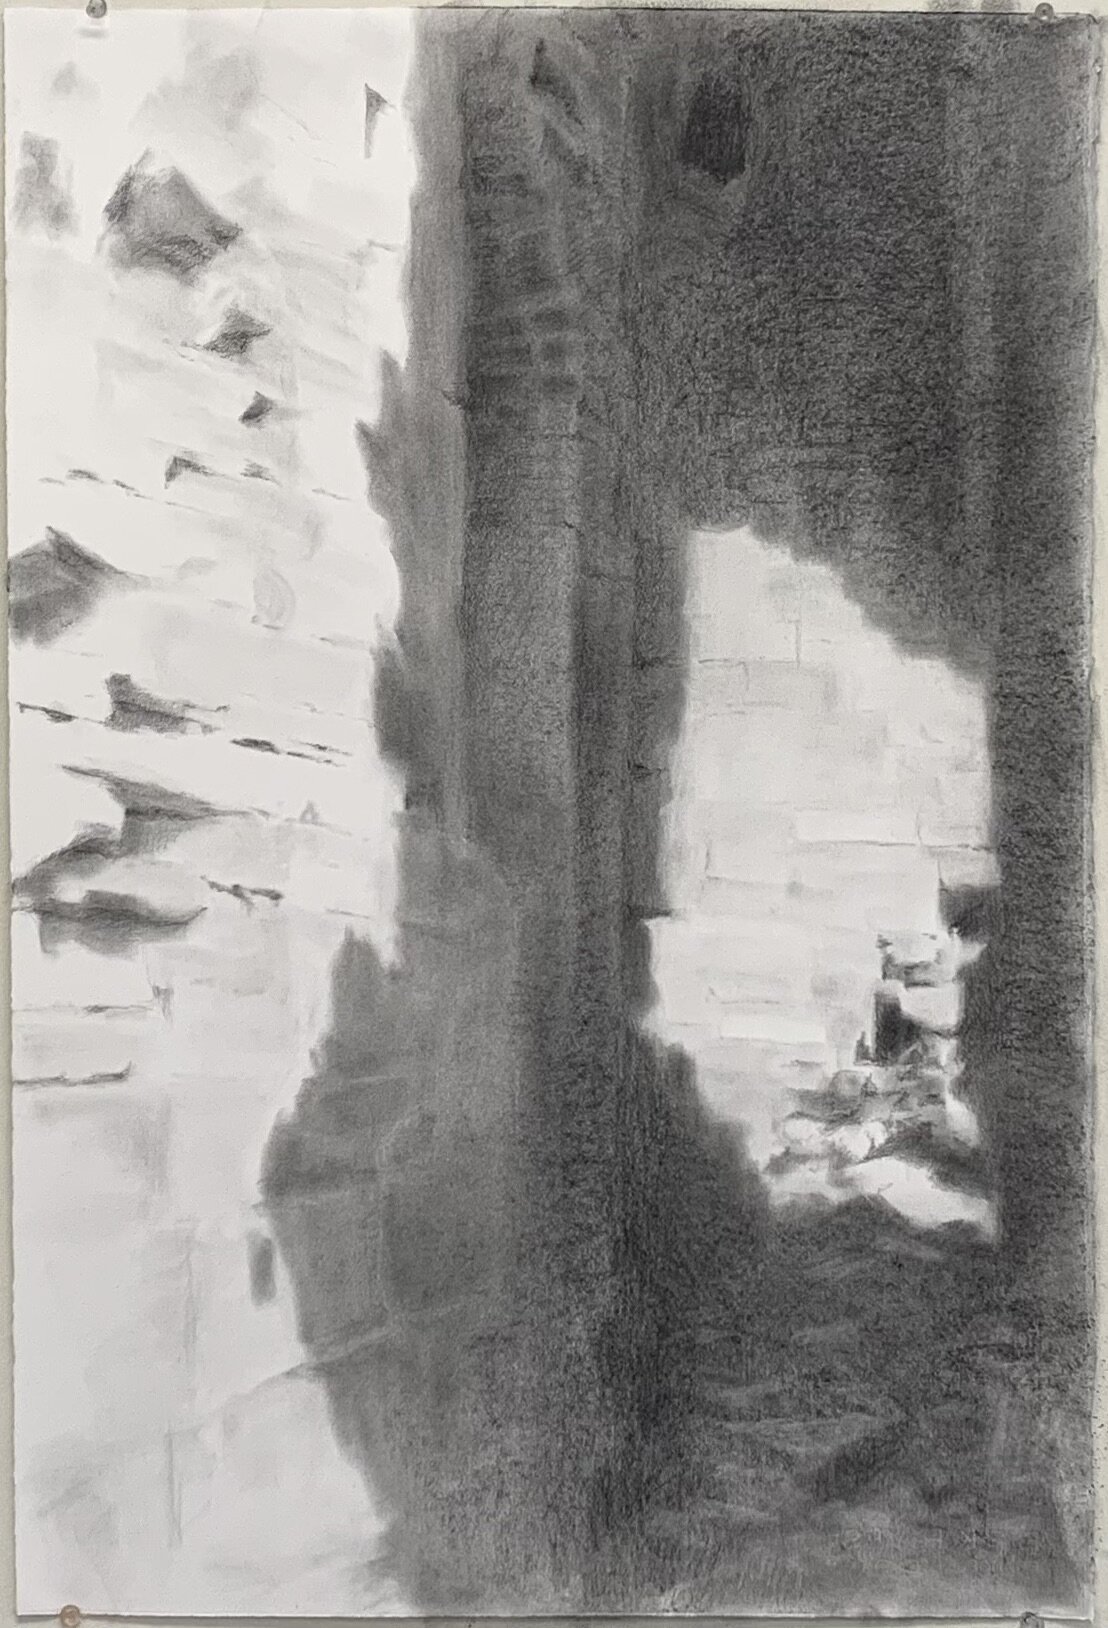   Dunamase 2 , 2019 graphite on paper, 30 x 20 in 